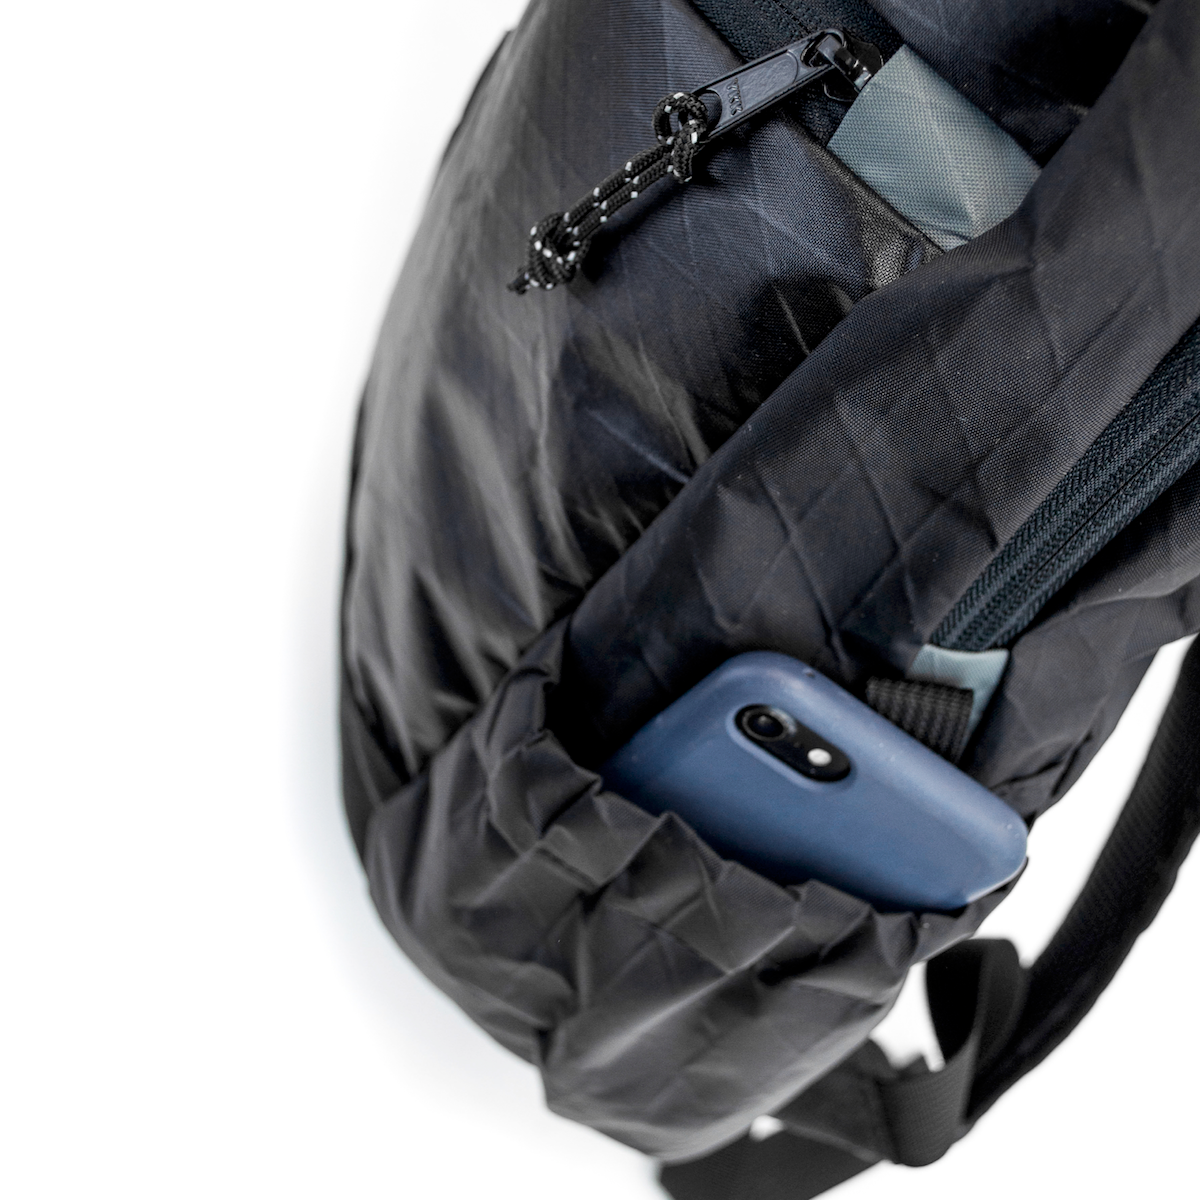 Flowfold 18L Optimist large backpack with water bottle sleeves close up with phone in pocket 